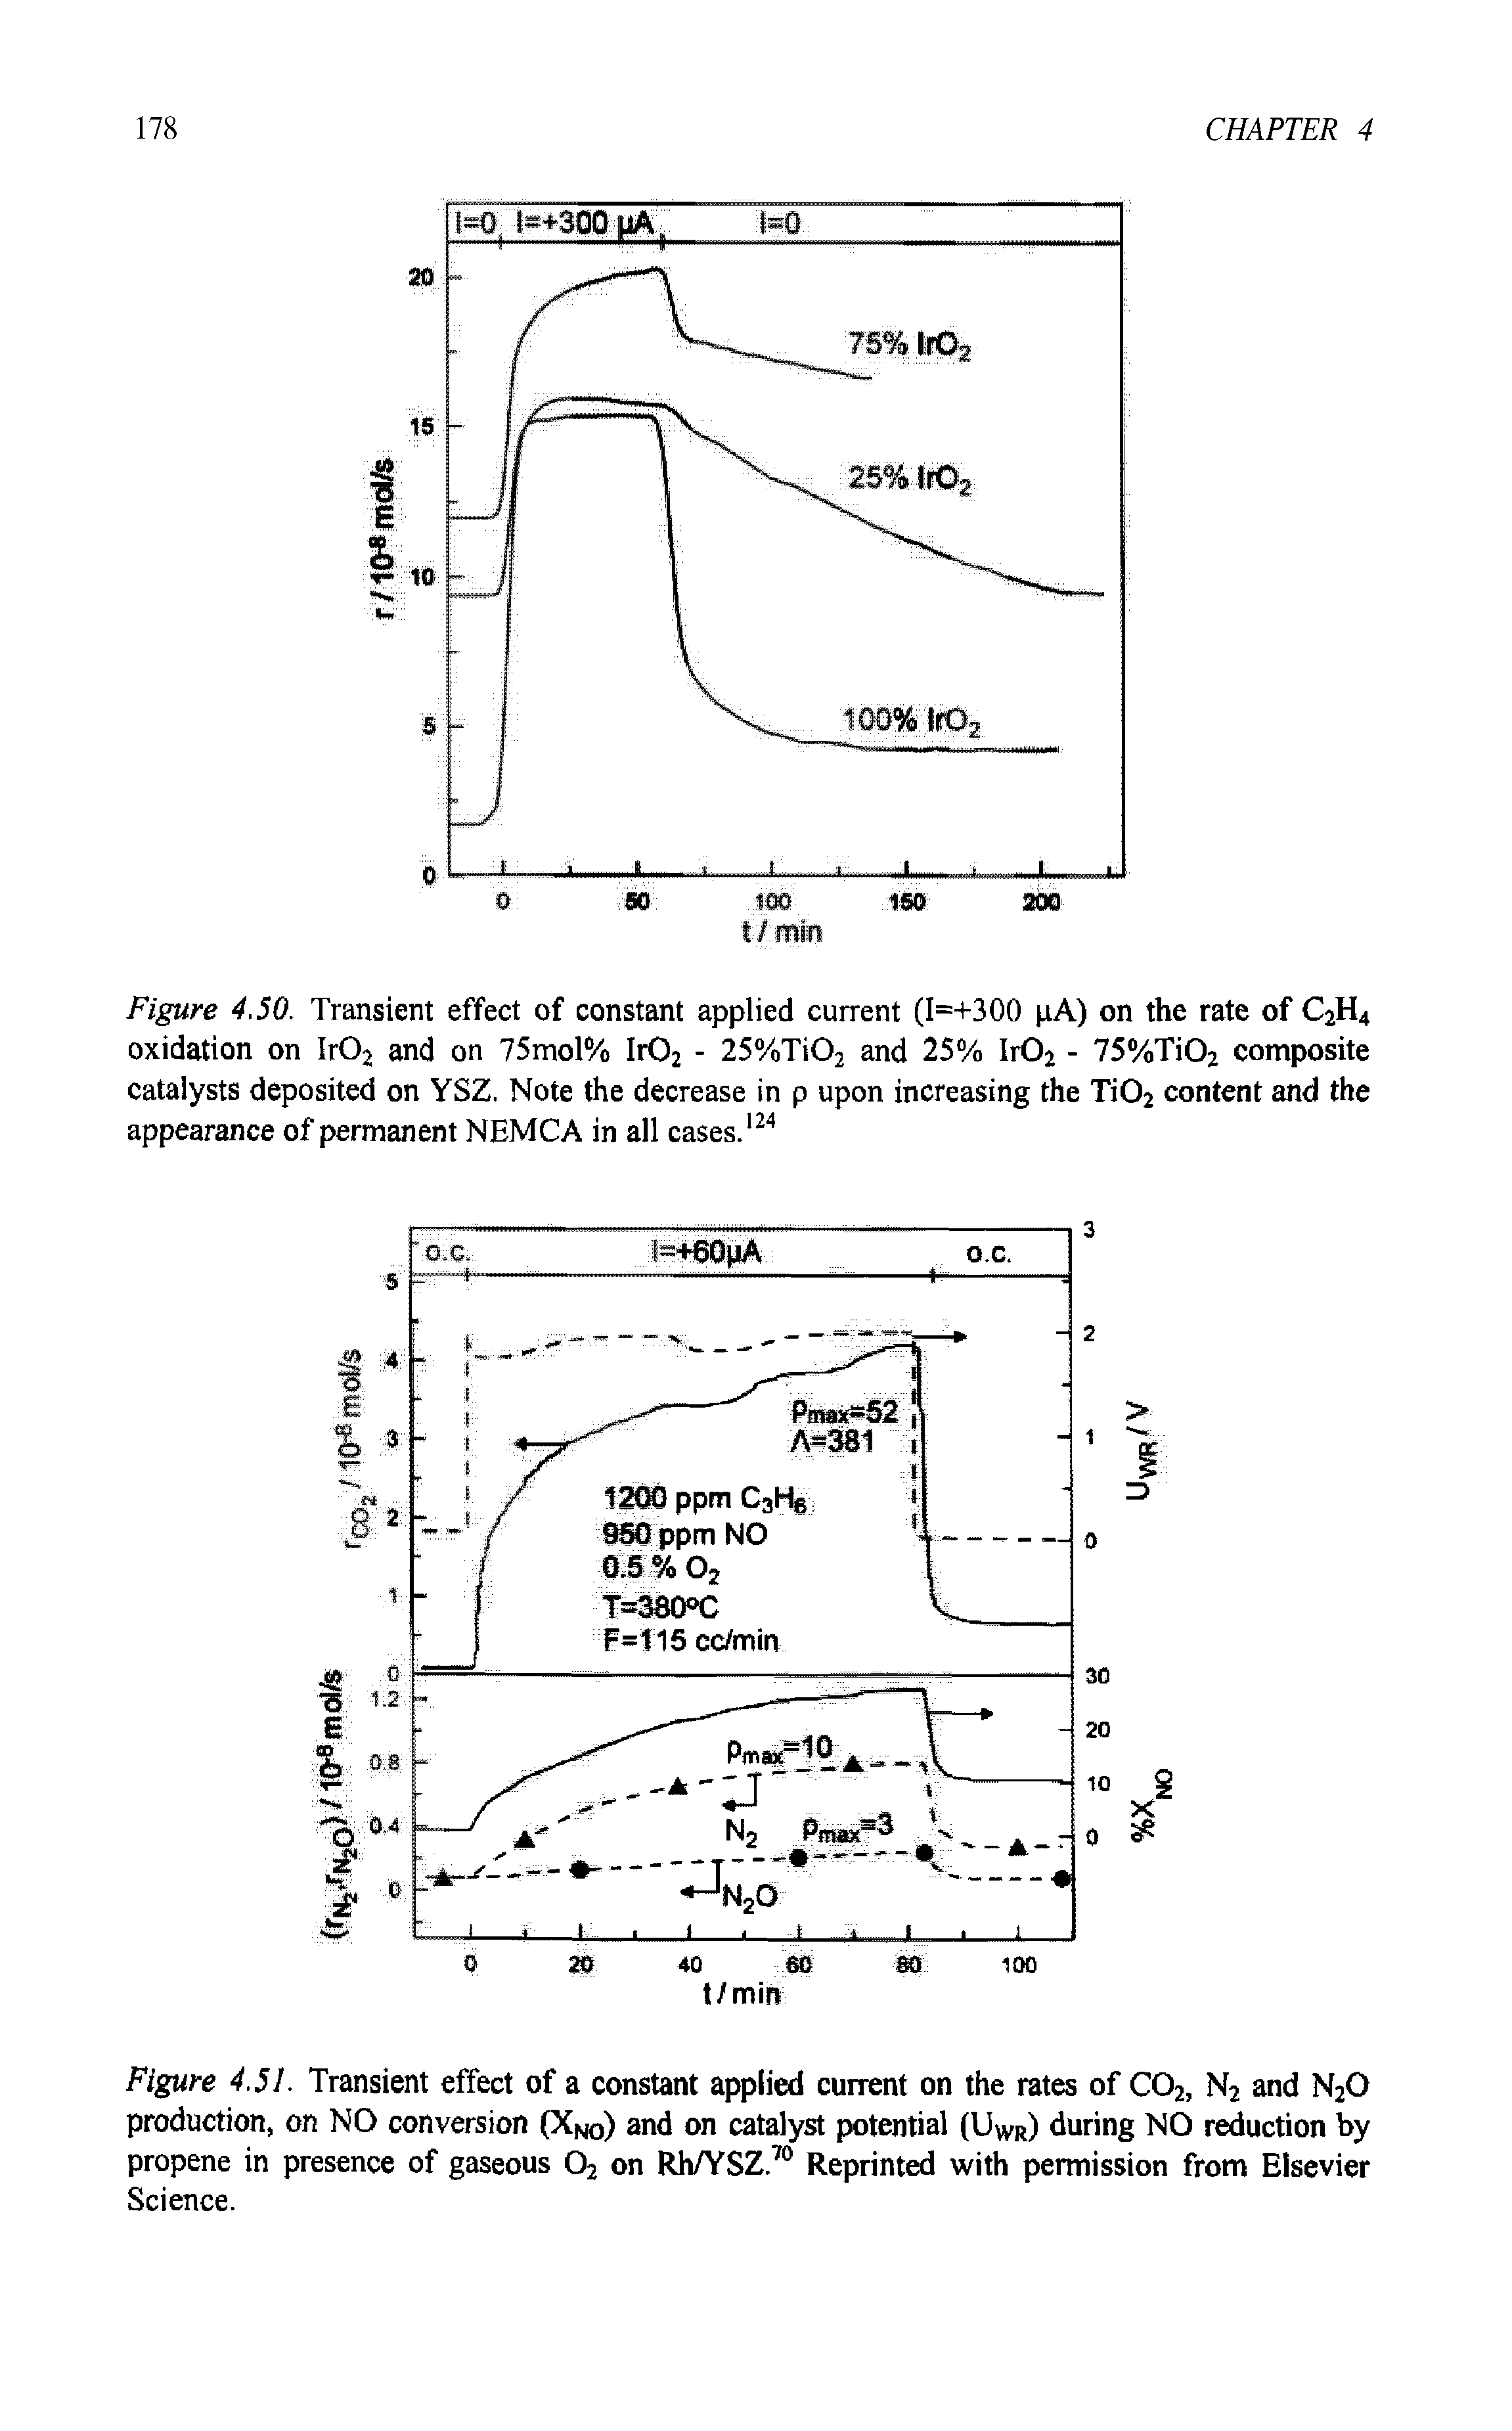 Figure 4.51. Transient effect of a constant applied current on the rates of C02, N2 and N20 production, on NO conversion (XN0) and on catalyst potential (Uwr) during NO reduction by propene in presence of gaseous 02 on Rh/YSZ.70 Reprinted with permission from Elsevier Science.